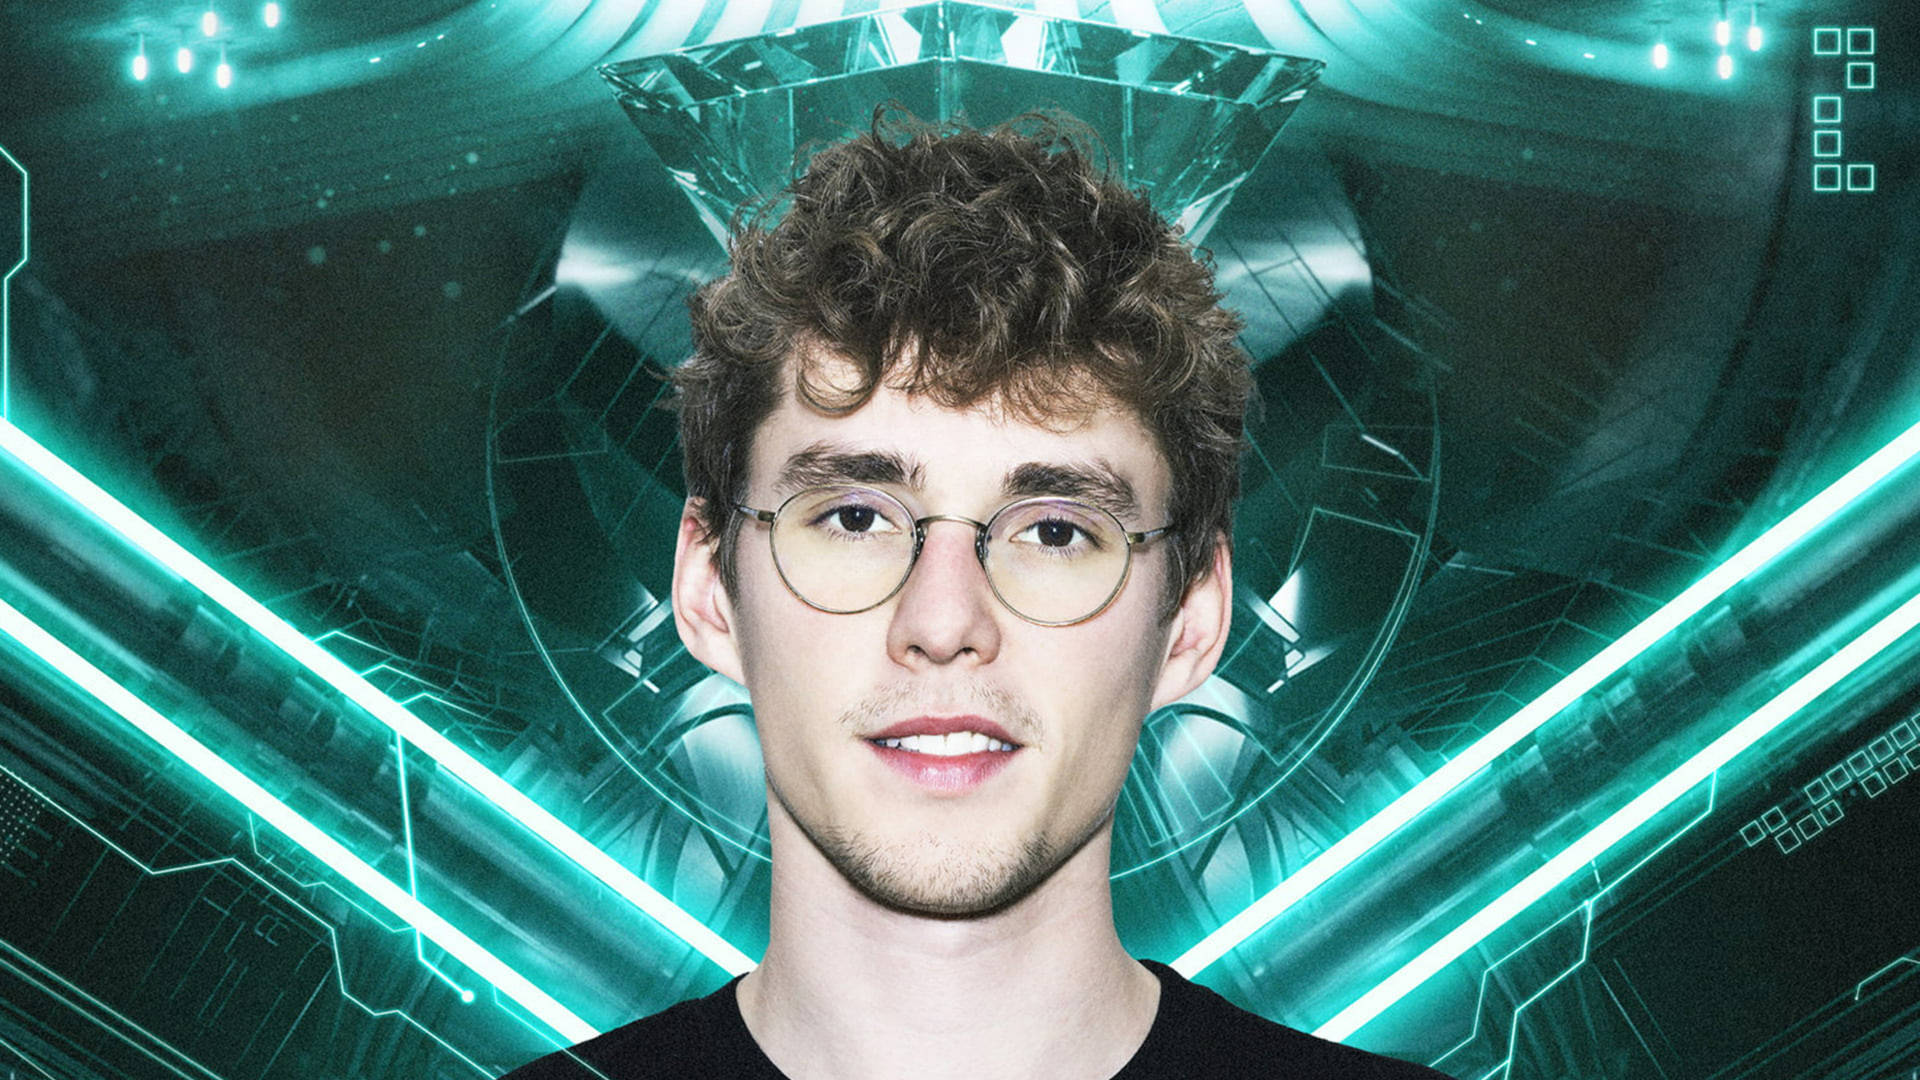 Lost Frequencies Neon Green Background